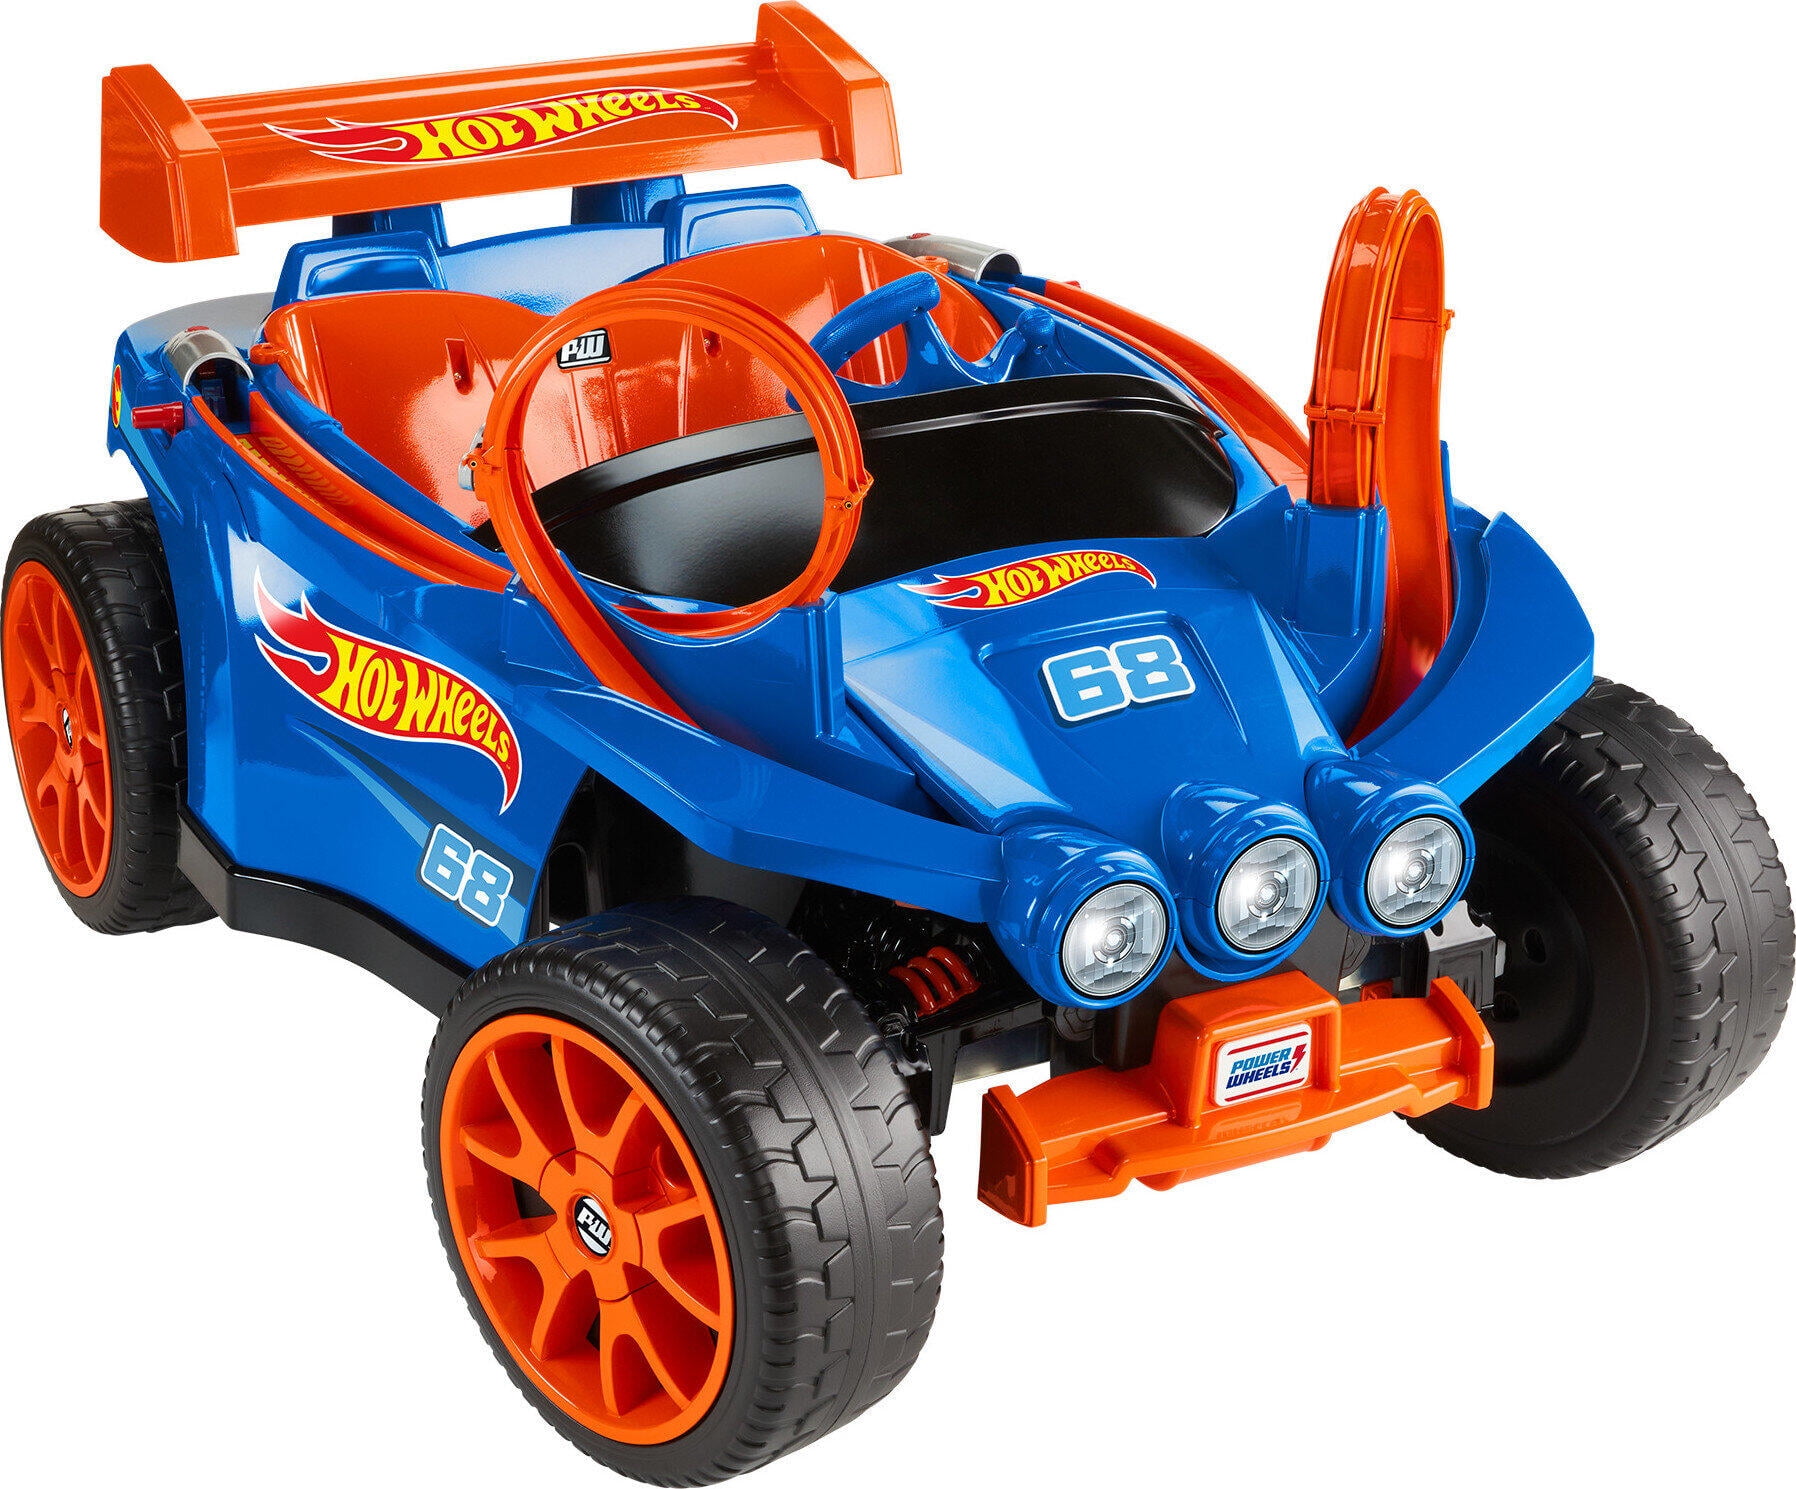 playa Abuelo combate Power Wheels Hot Wheels Racer Battery-Powered Ride-On and Vehicle Playset  with 5 Toy Cars - Walmart.com